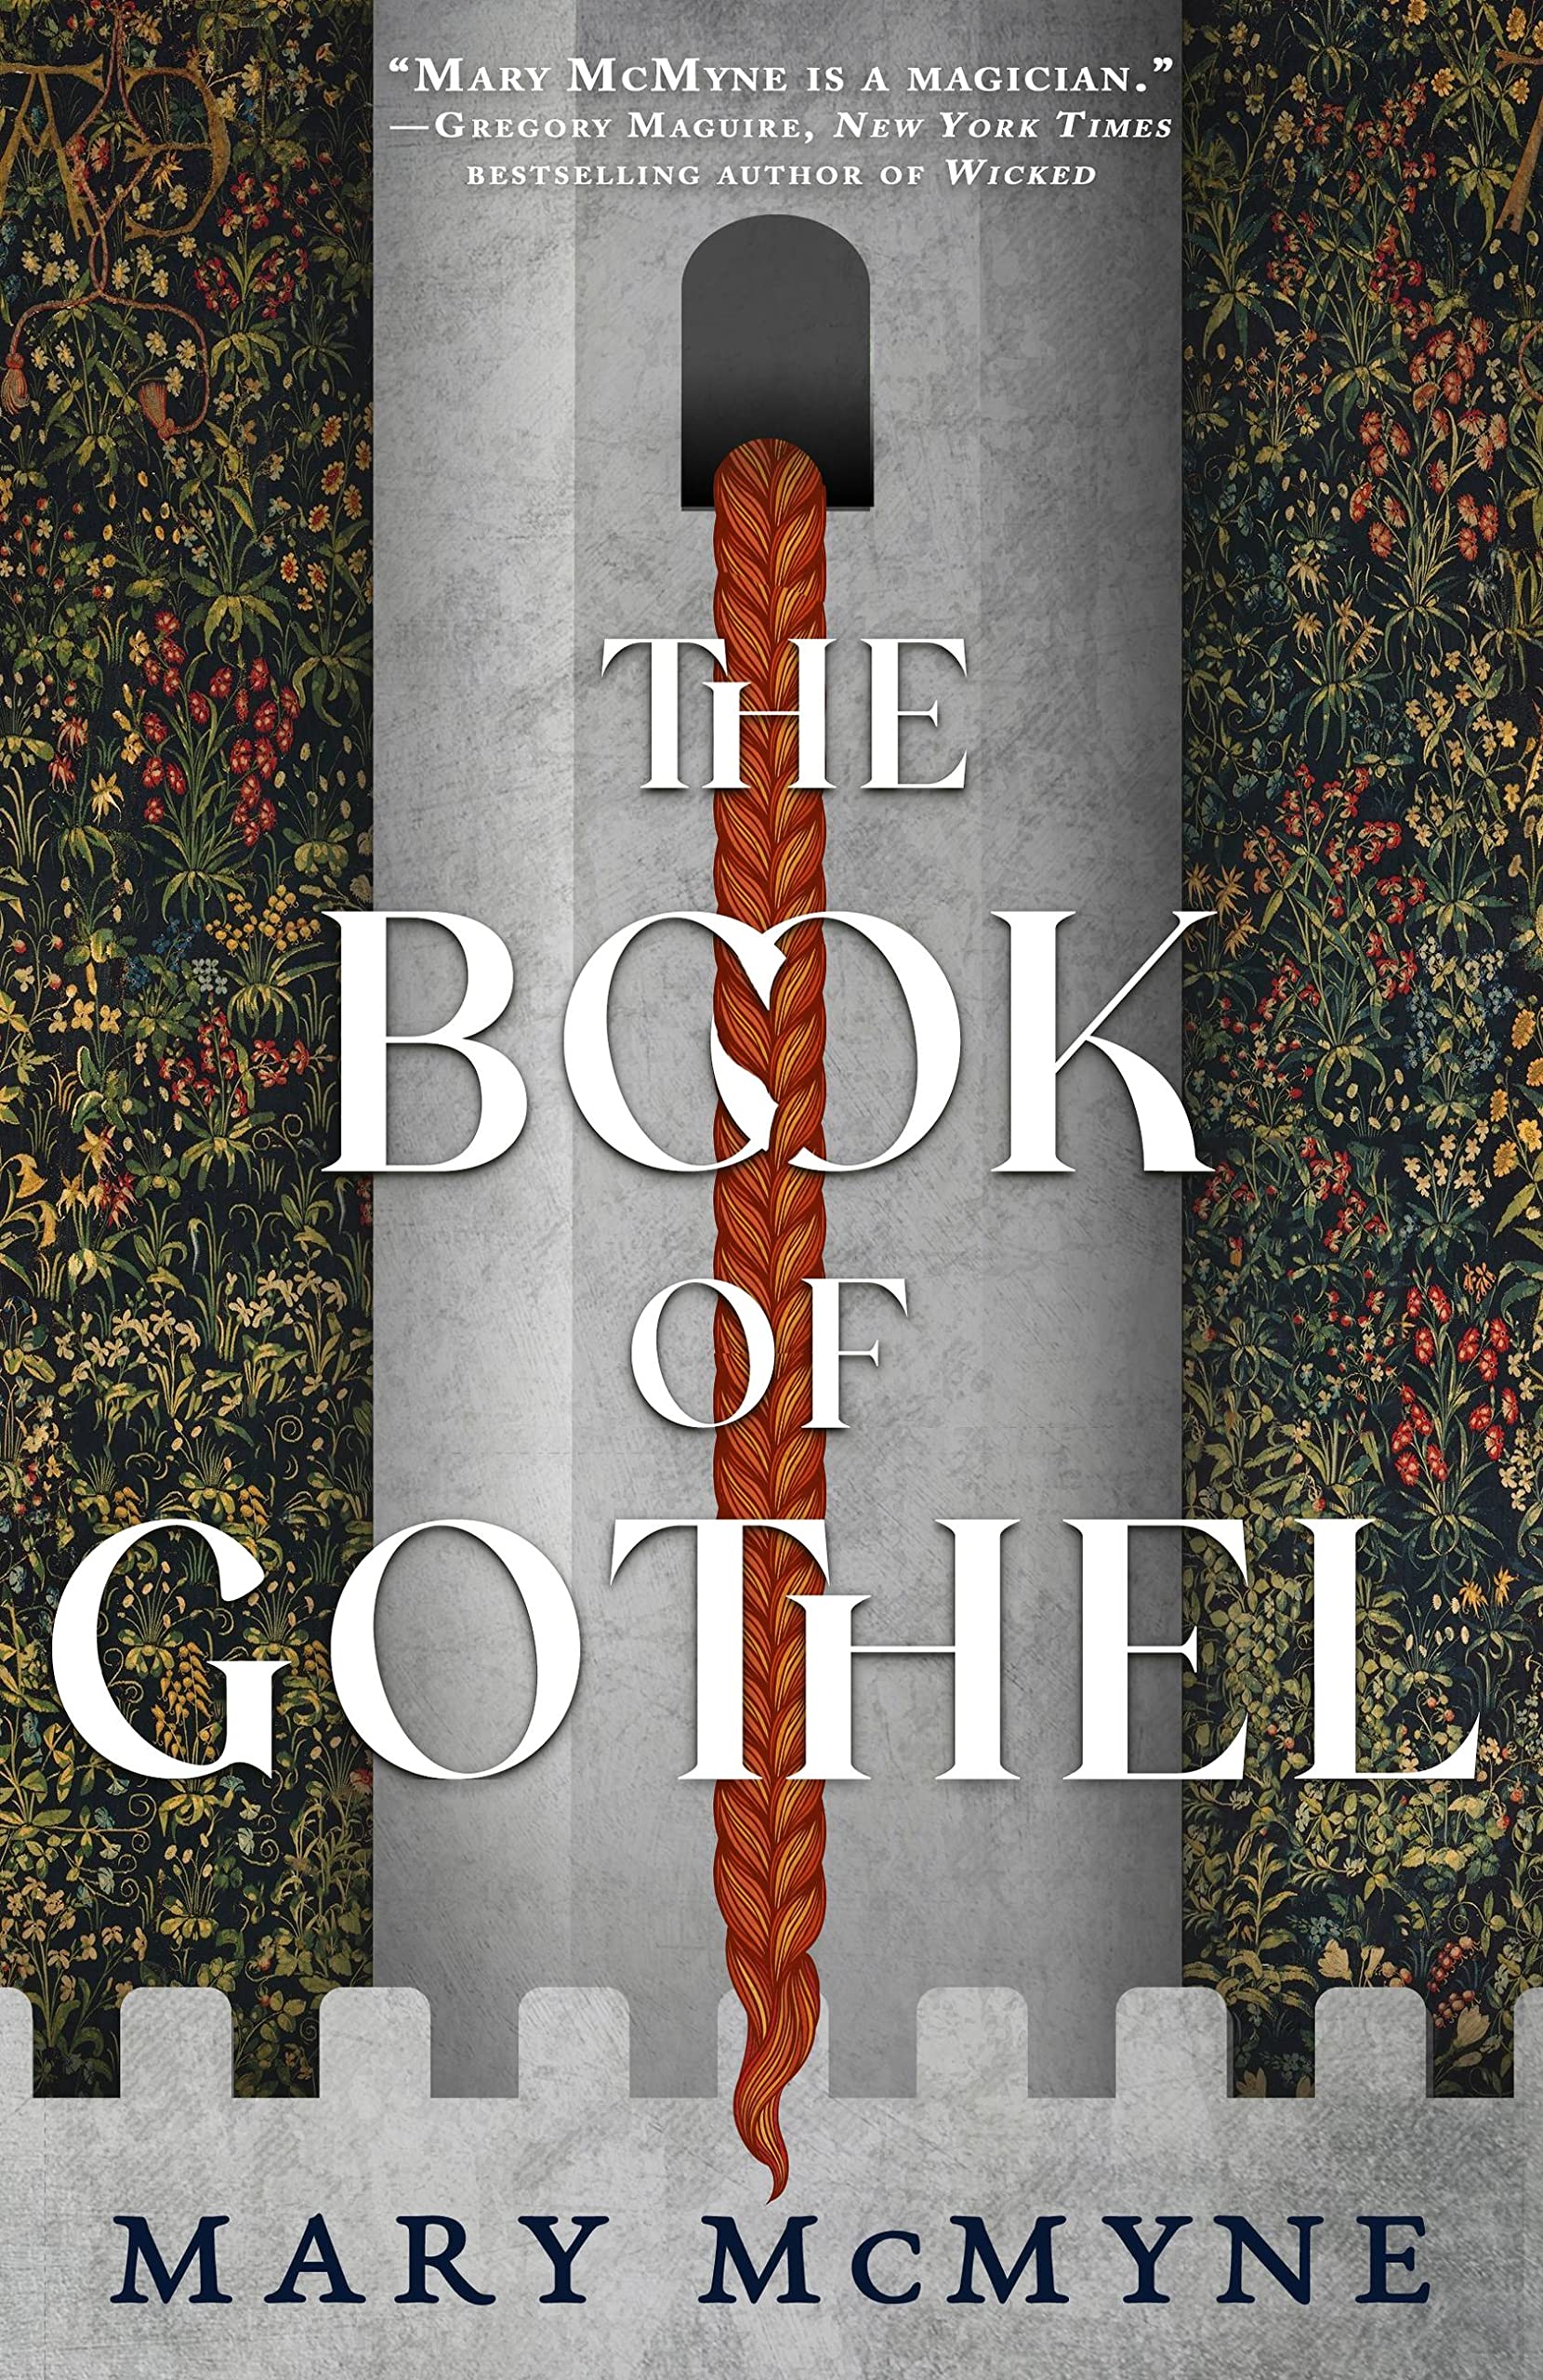 Image for "The Book of Gothel"